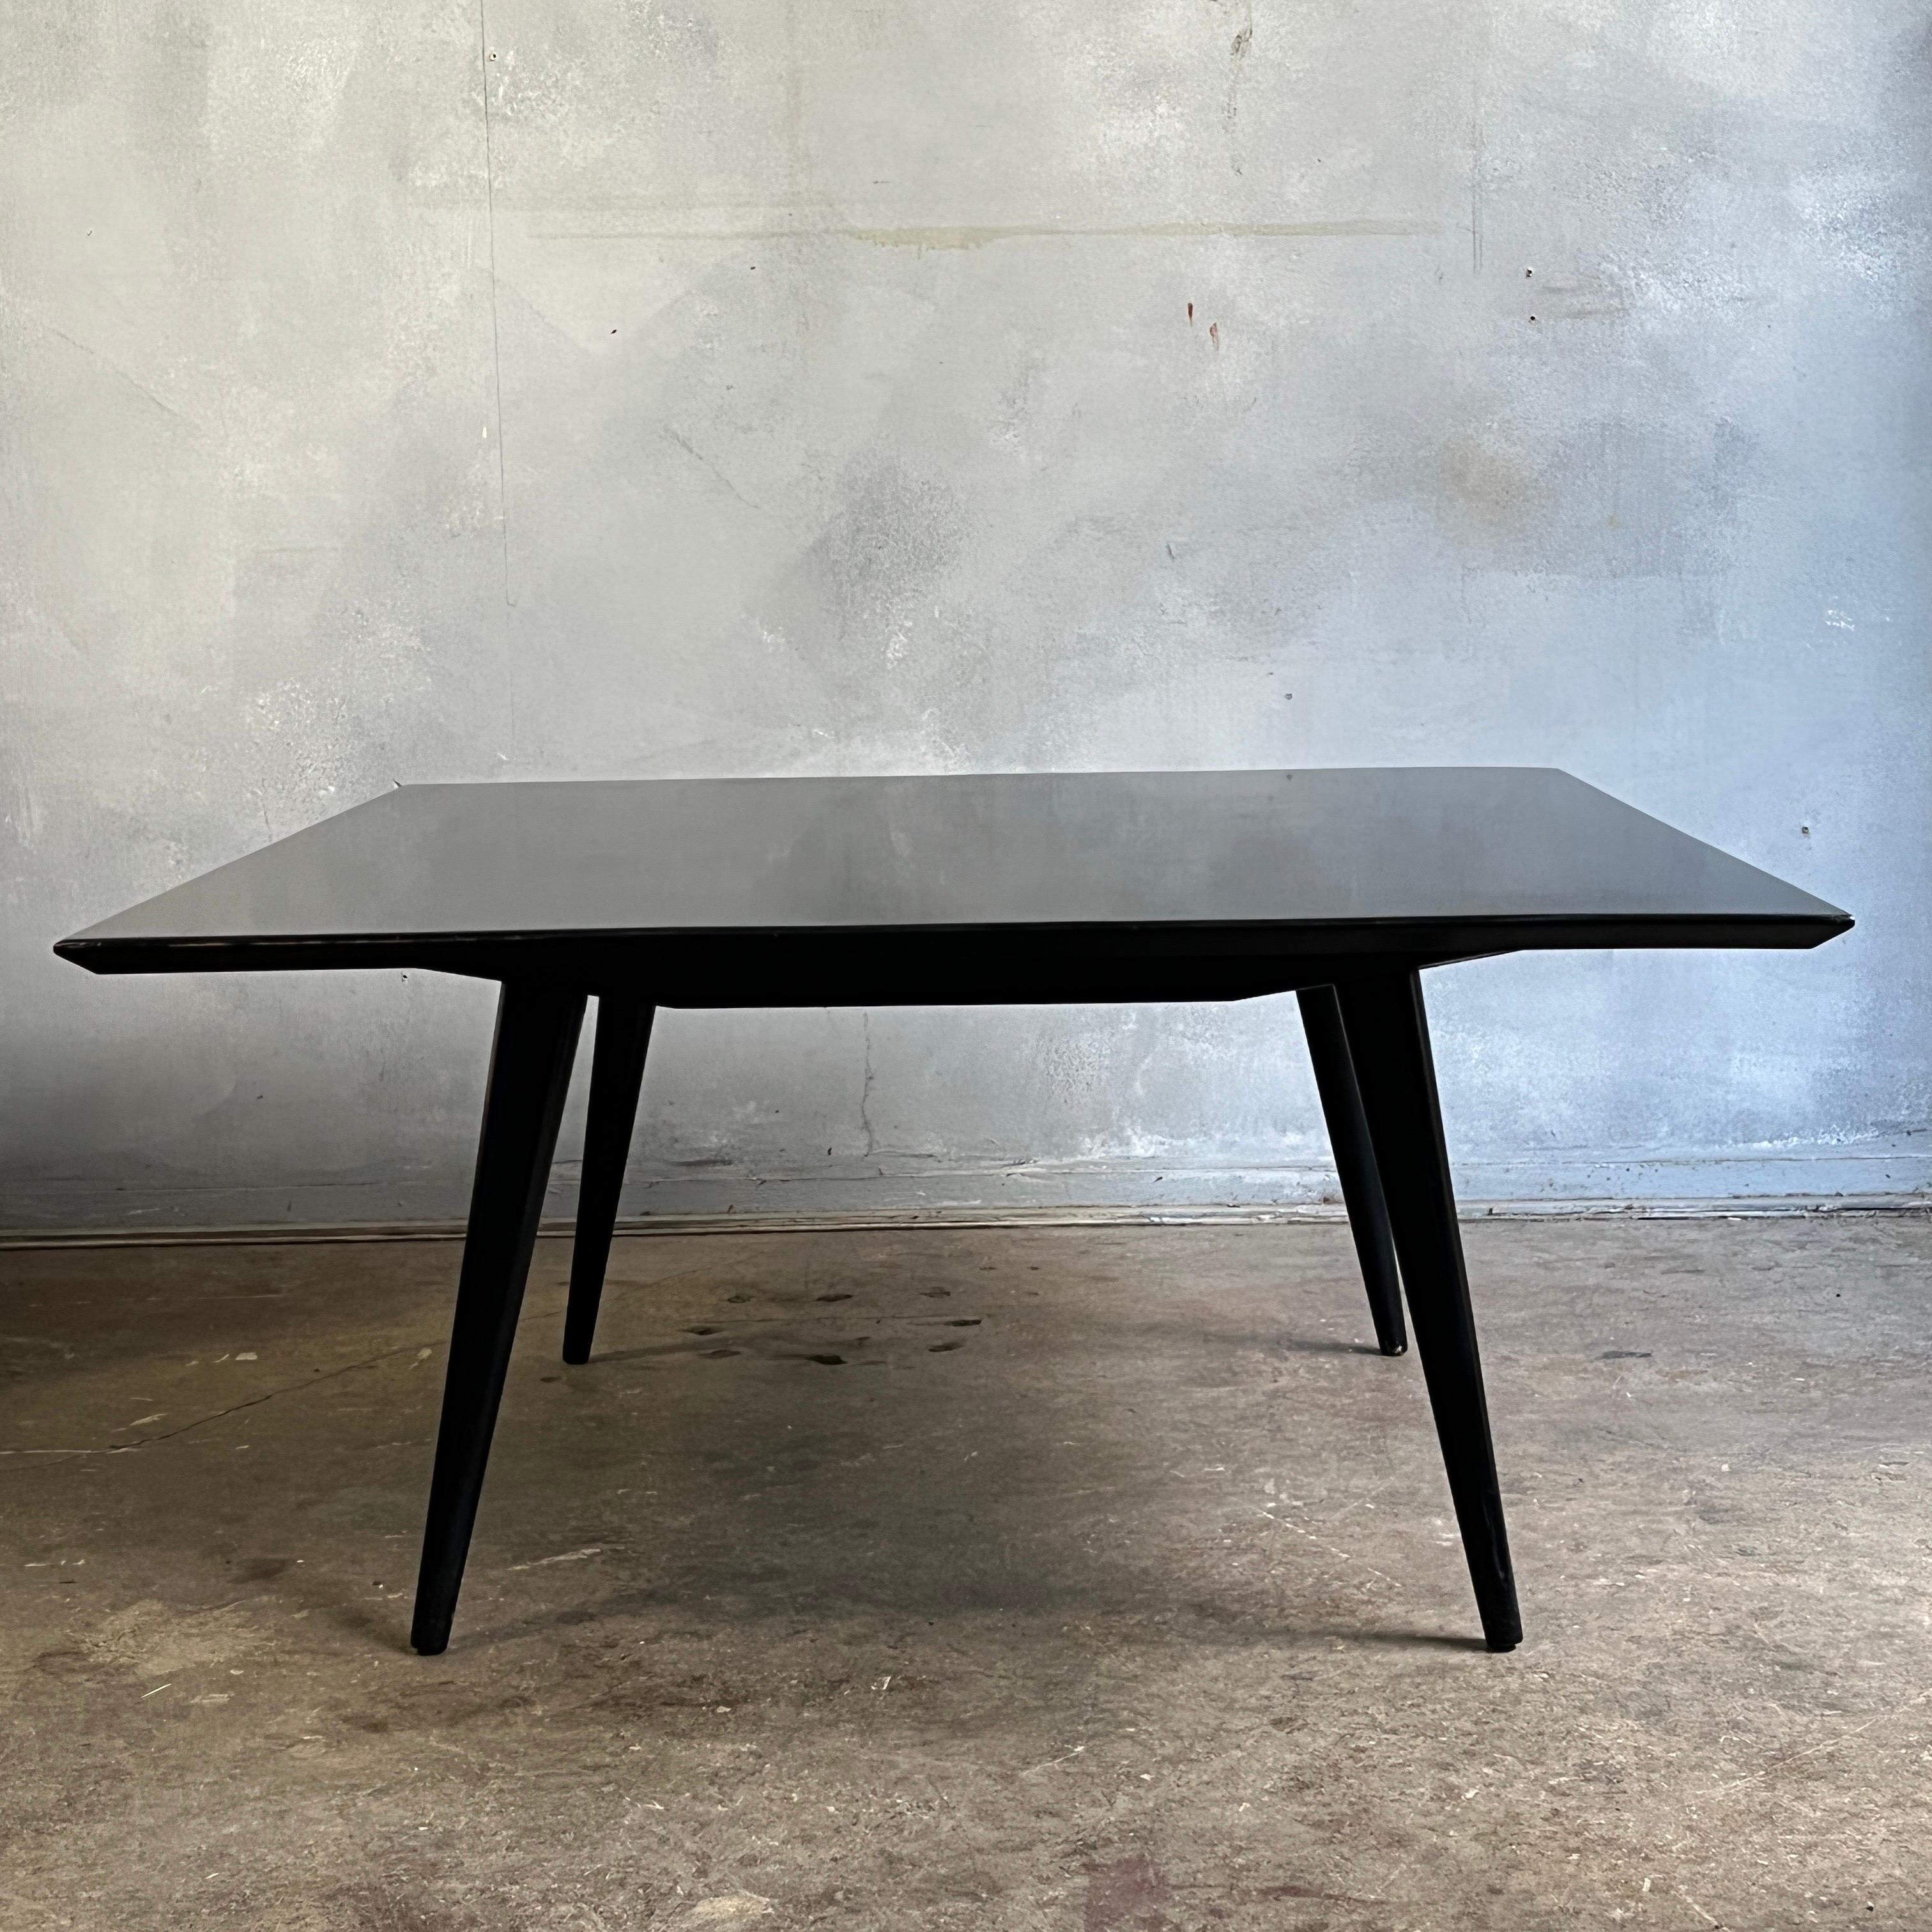 Beautiful Paul McCobb Planner Group #1546 solid maple 32'' square inch coffee table / bench in original heavy black lacquer finish with nice patina. Very delicate designed coffee table with tapered legs - All legs unscrew just fine. All solid maple.